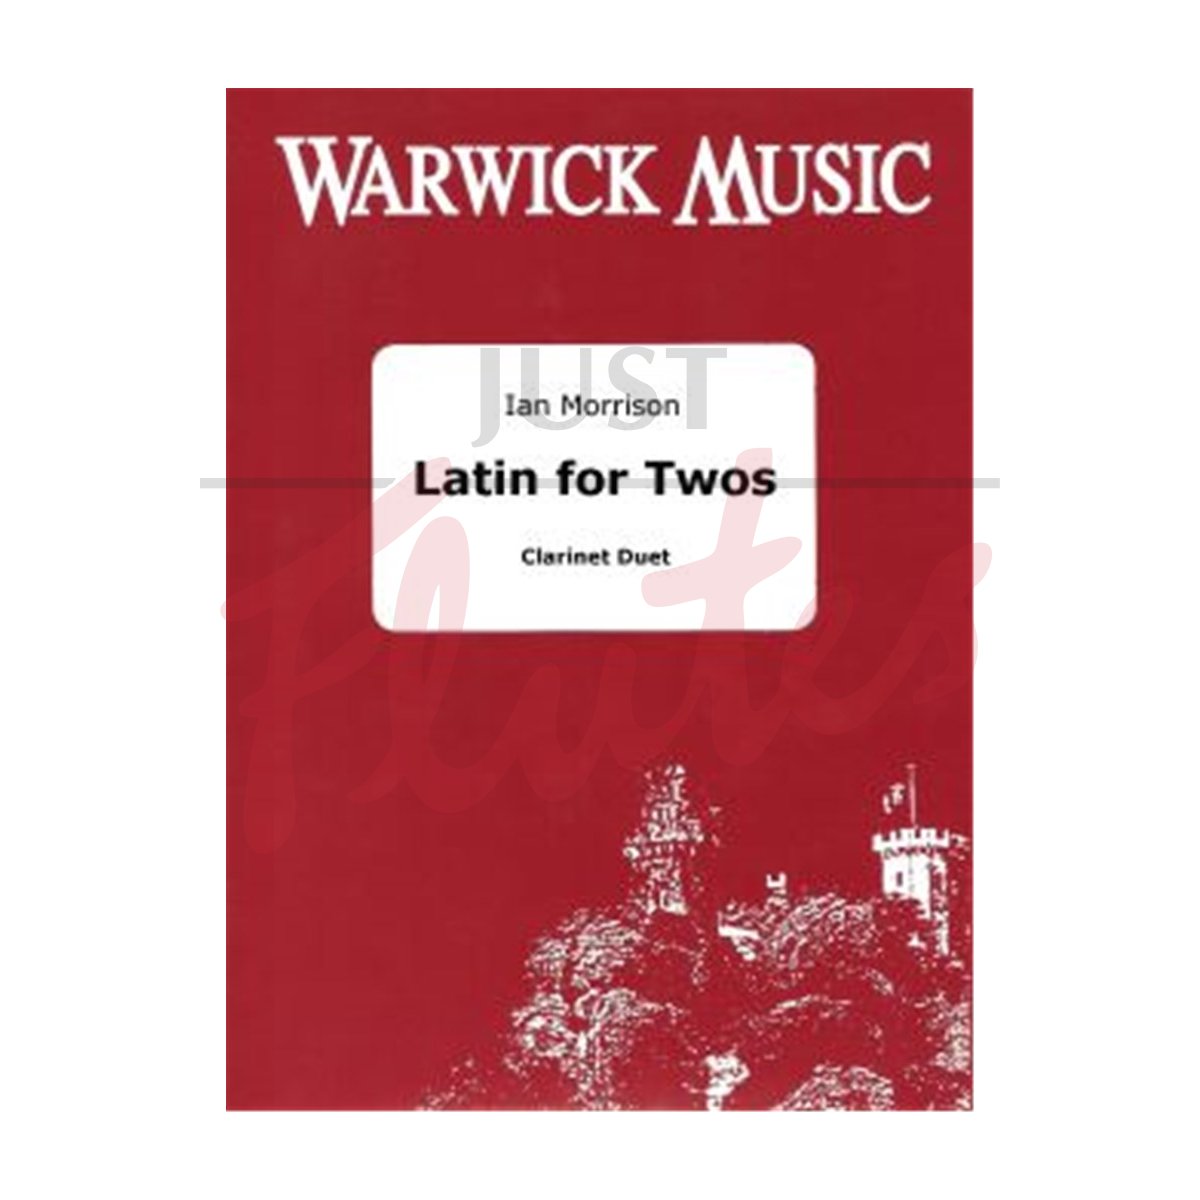 Latin for Twos for Clarinet Duet